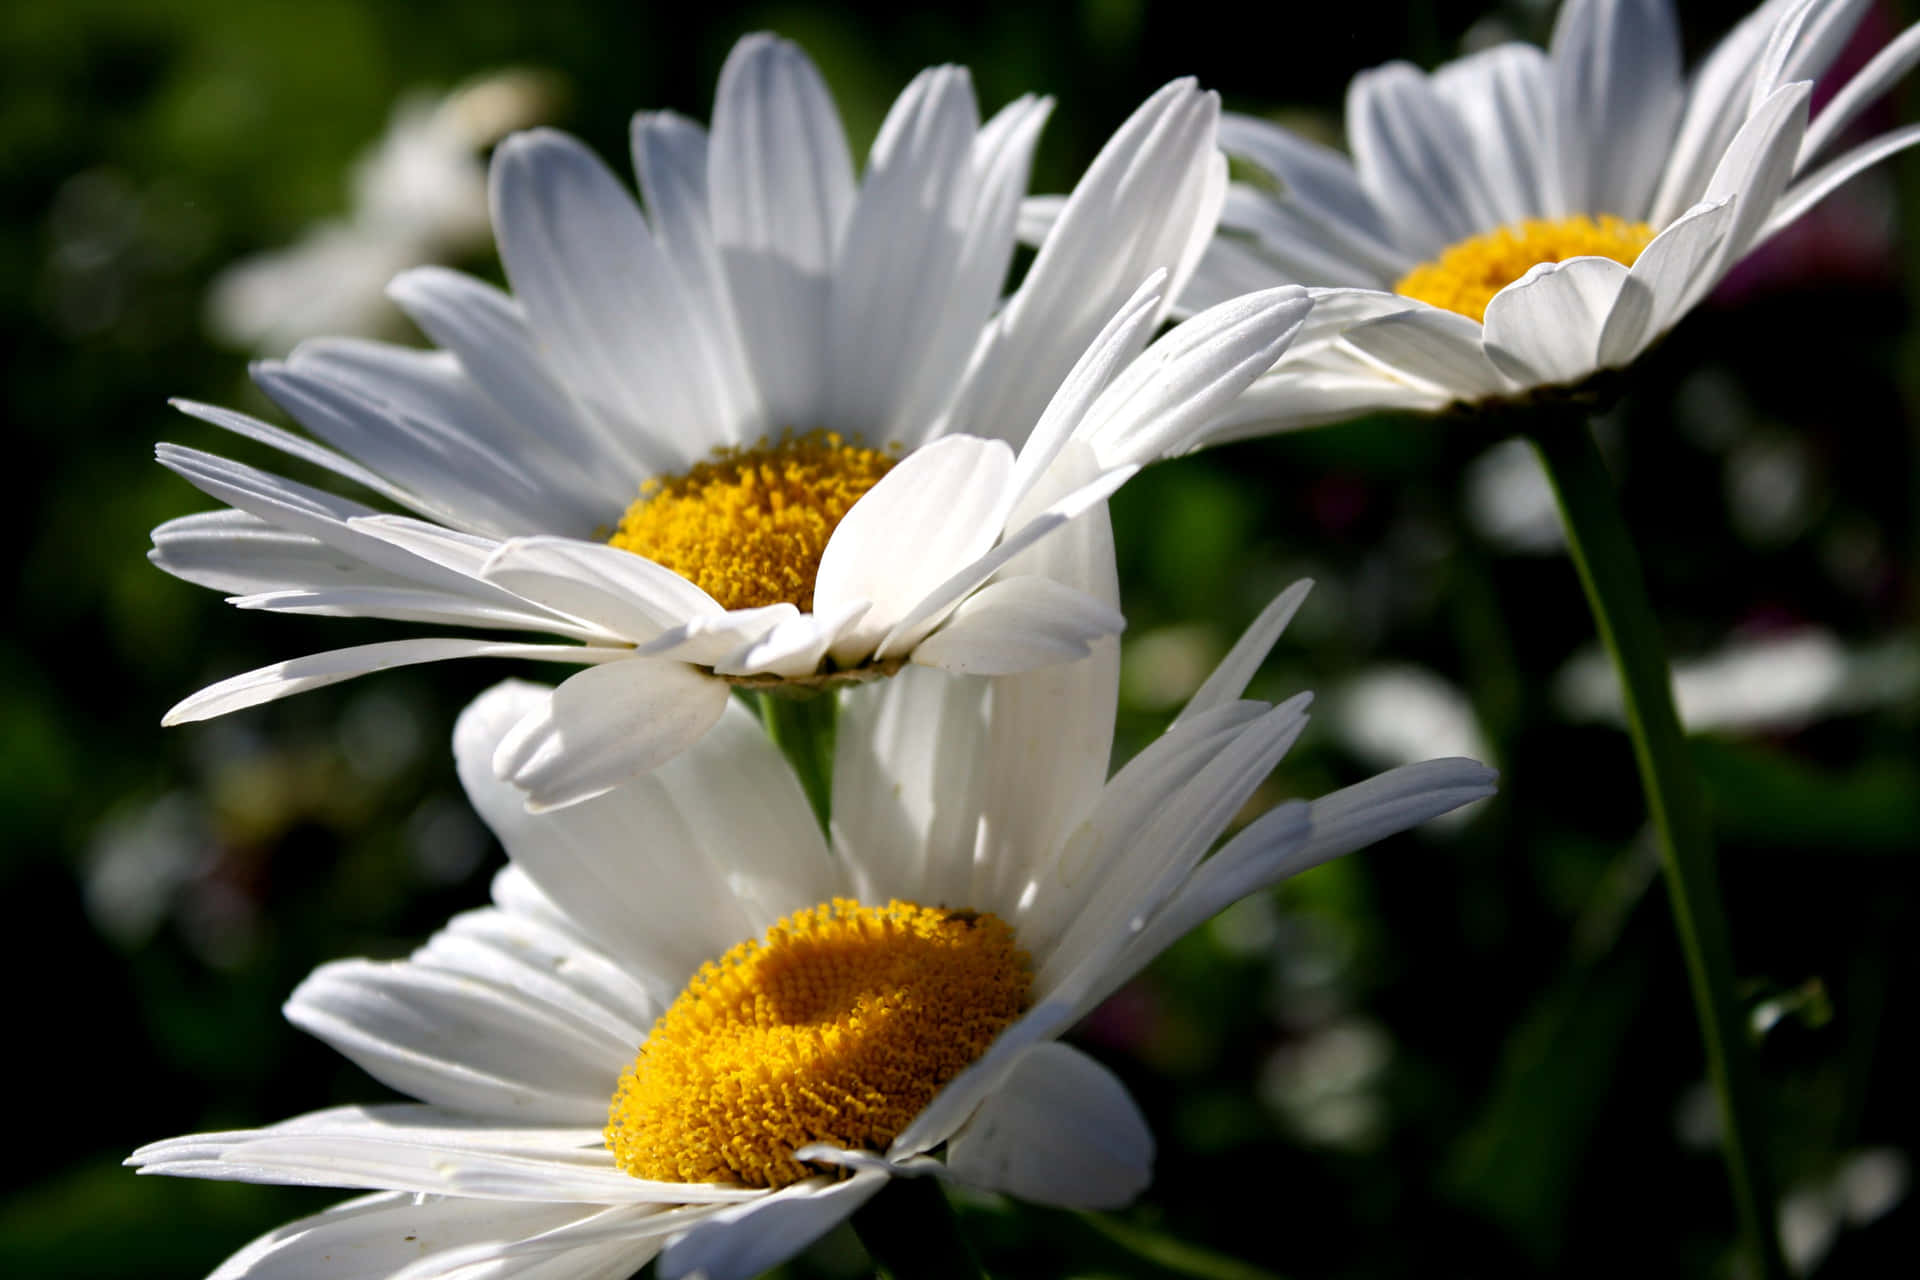 "The Beauty in Nature - A Daisy Flower"